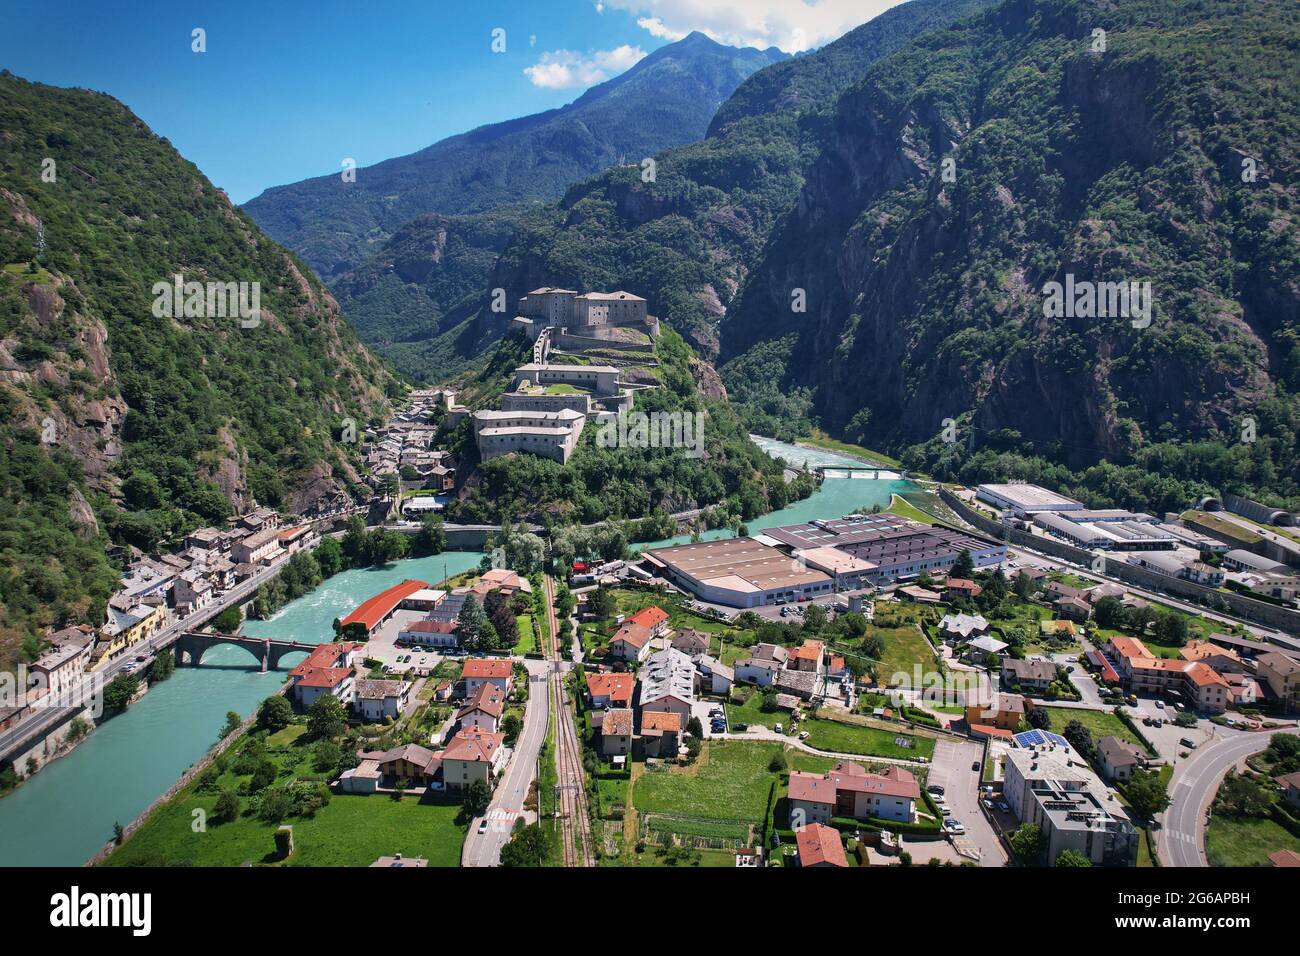 Amazing castles of Valle d'Aosta- Bard fortress, north Italy Stock Photo